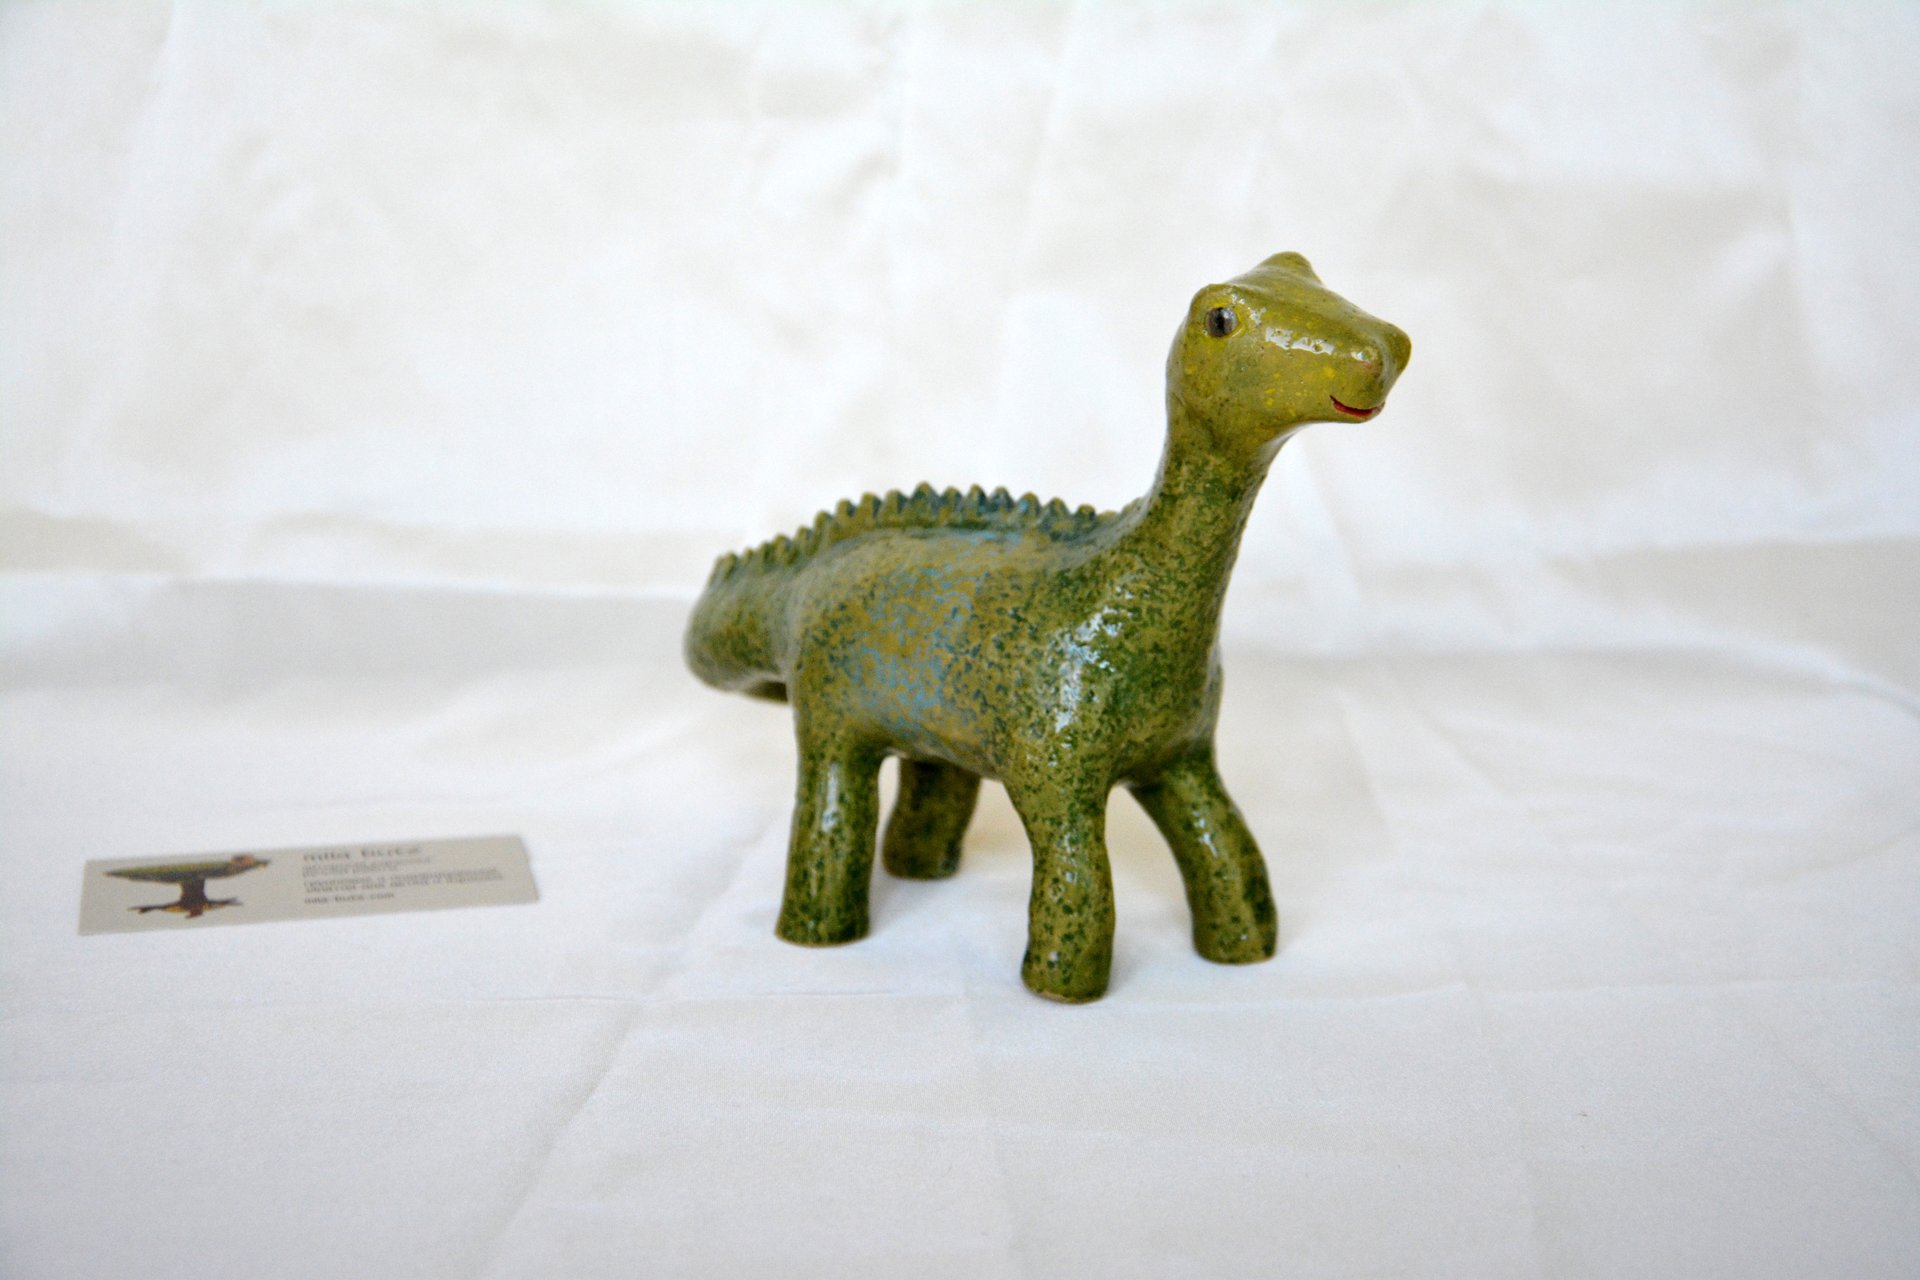 Dino - Ceramic other figures, height - 20 cm, photo 5 of 5.